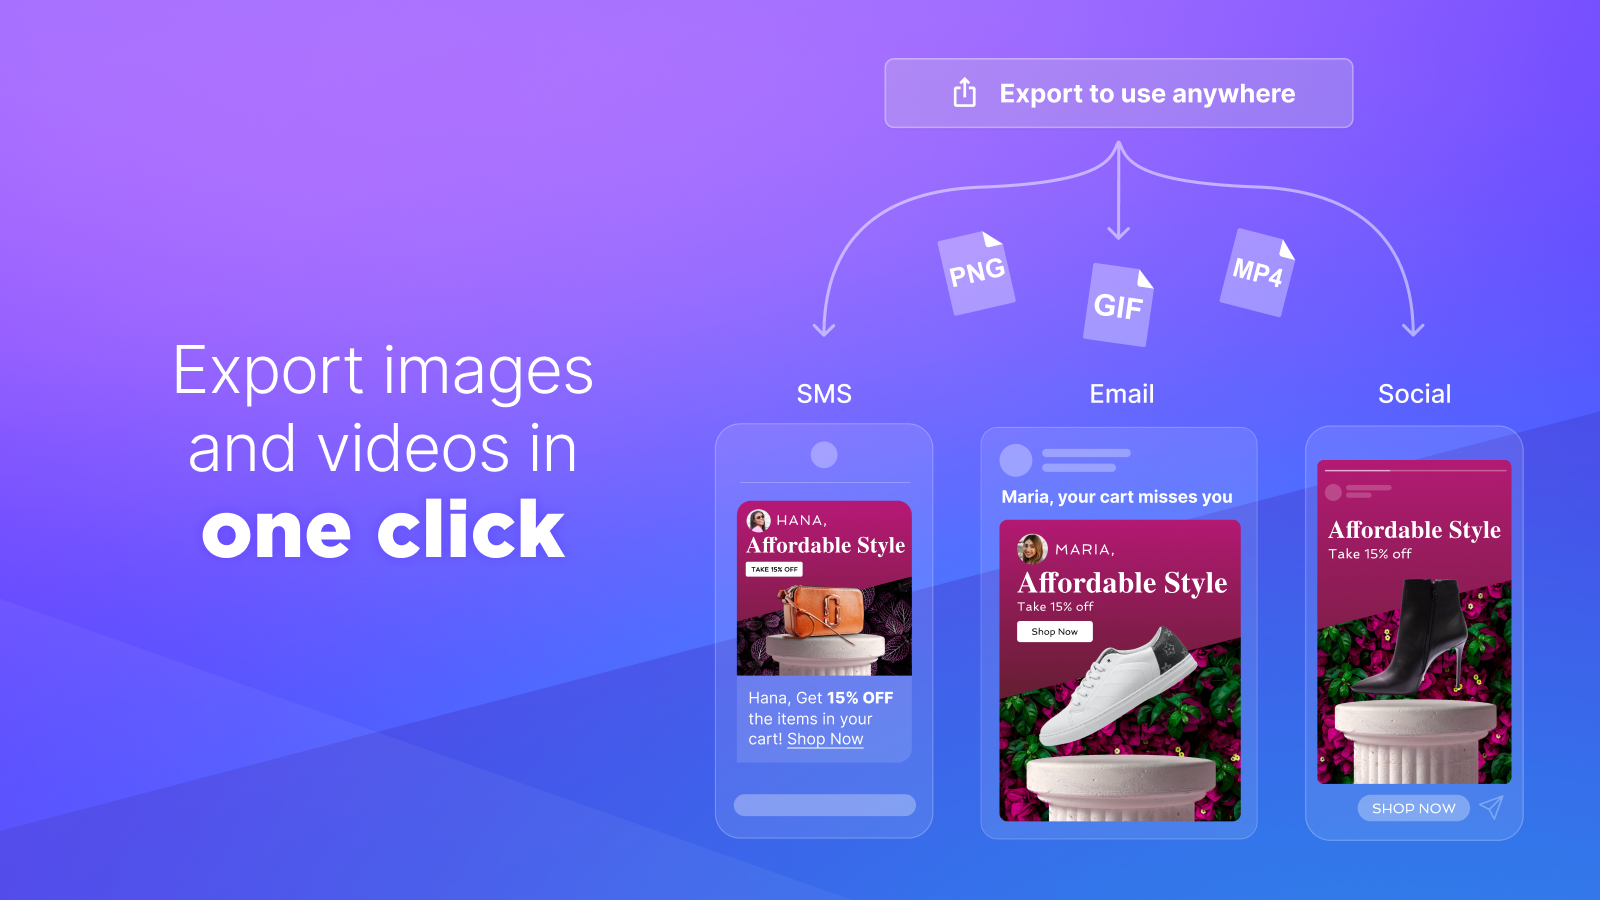 Export images and videos in one click